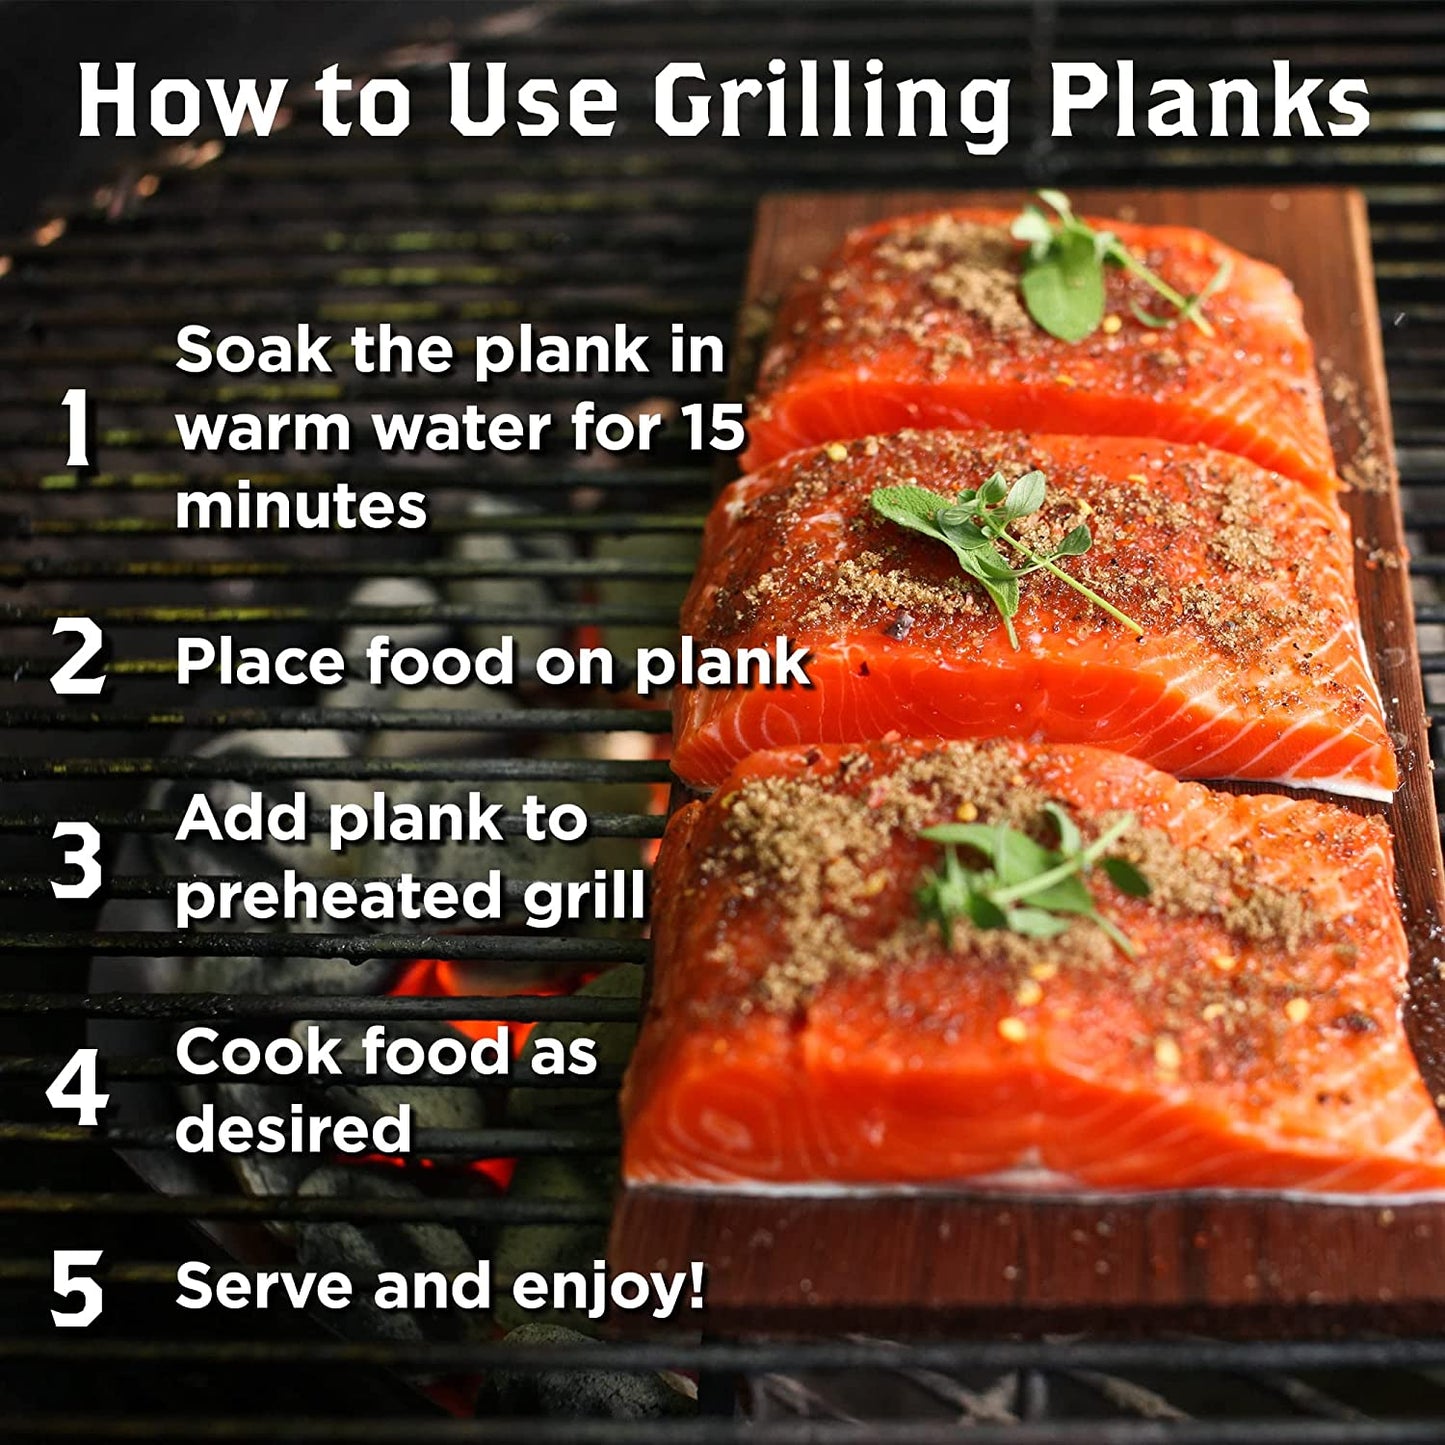 Cedar Planks for Grilling Salmon - 5x11" Retail 12 Pack